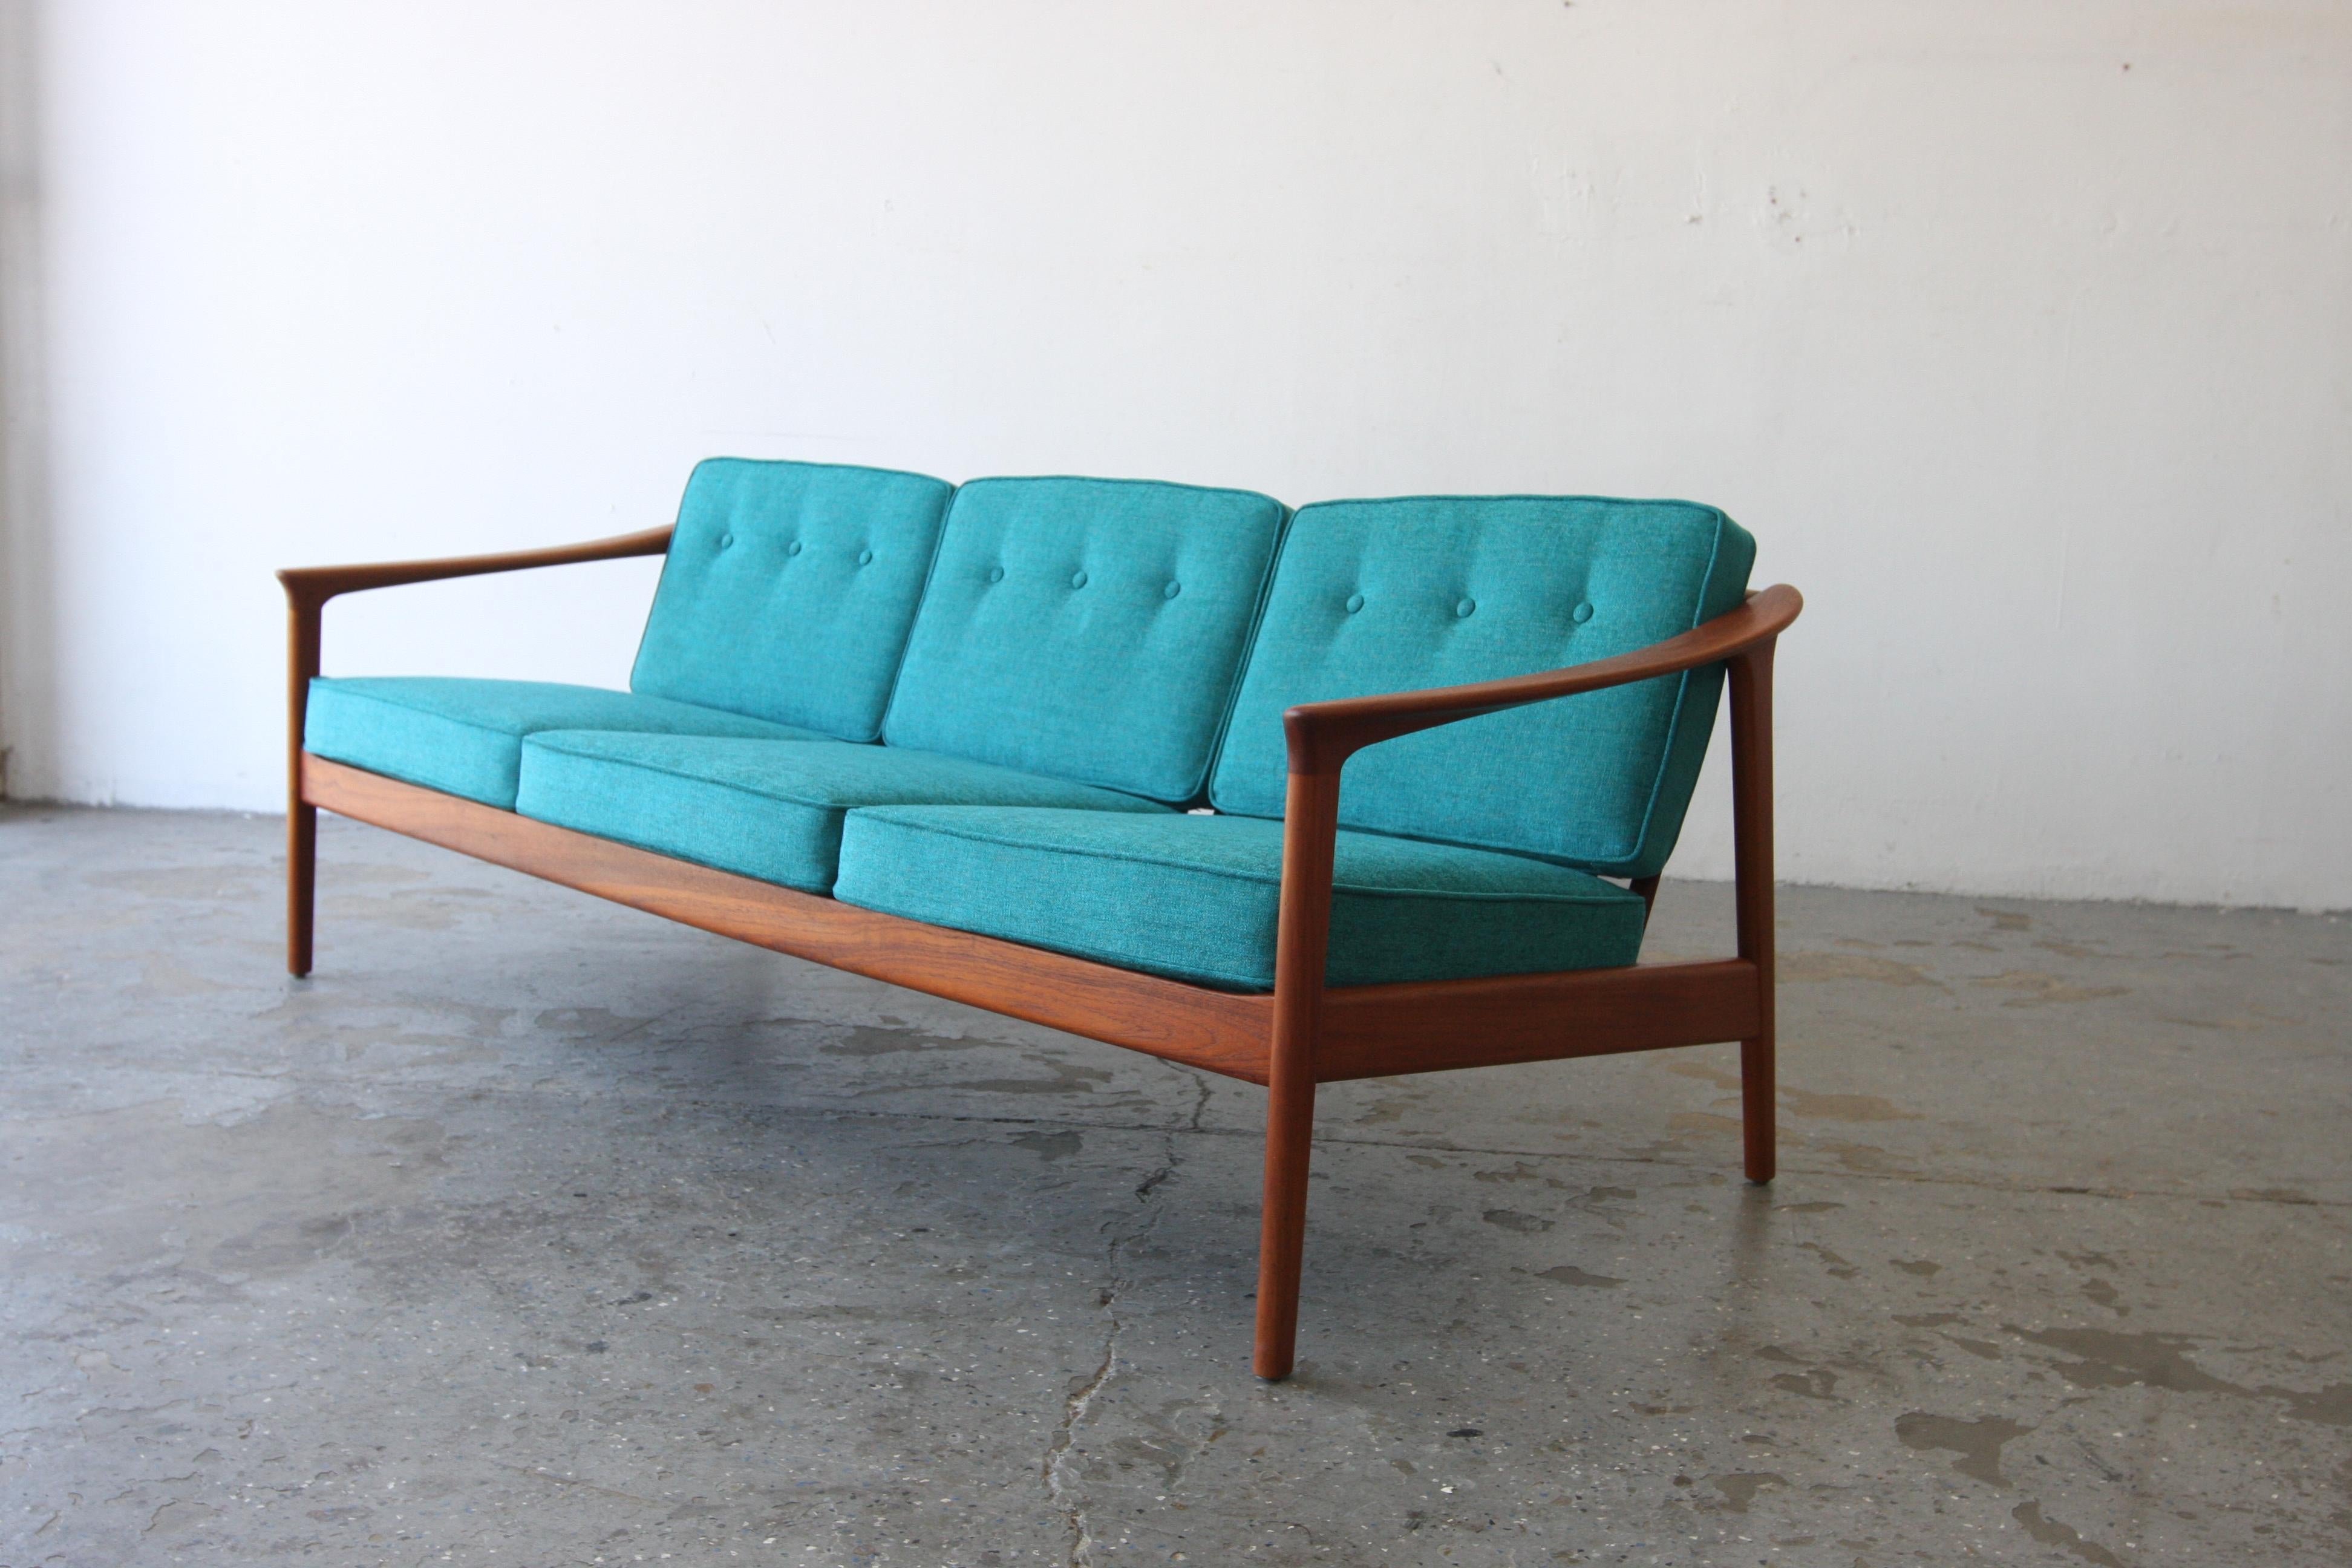 Monterey /5-161 Sofa designed by Folke Ohlsson, produced by the Swedish manufacturer Dux in the 1960’s. Sofa has profiled armrests, representing high craftsmanship, characteristic of Scandinavian design.

74 inches long 29 high 29 deep 

Seat W 